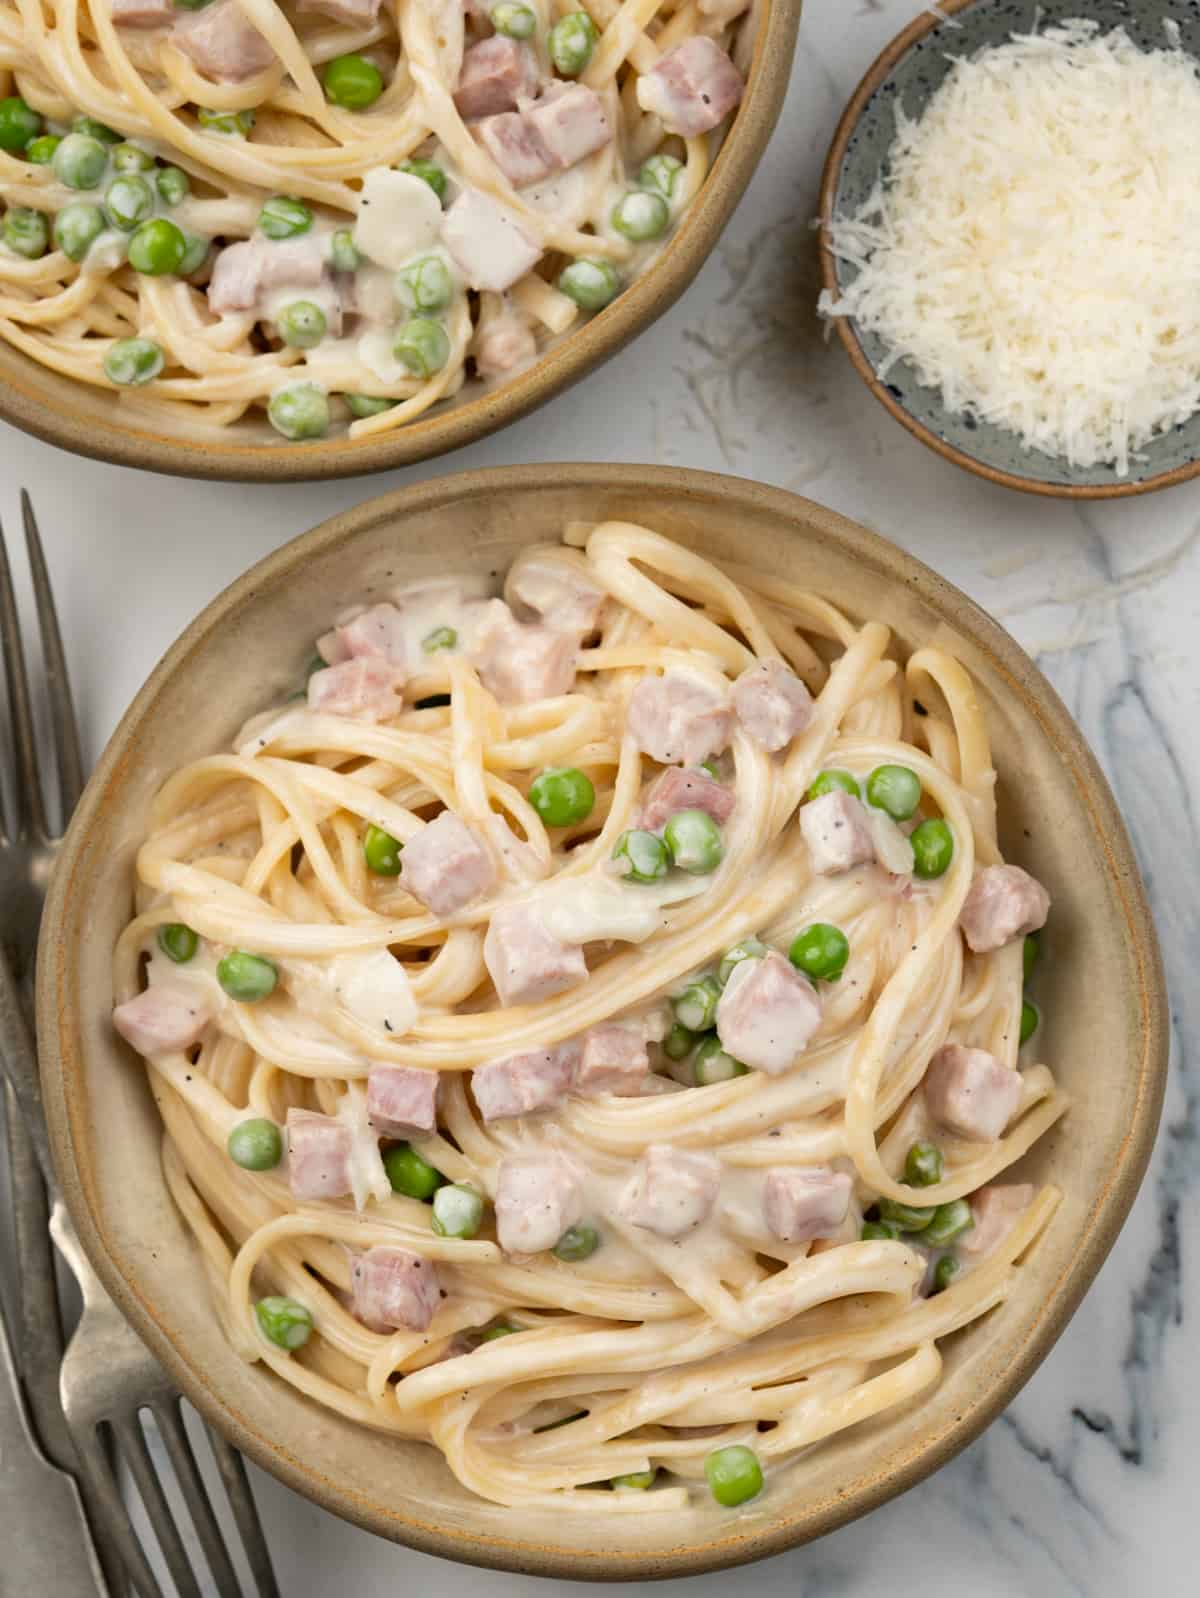 Linguine pasta with ham and green peas in a garlic parmesan sauce.